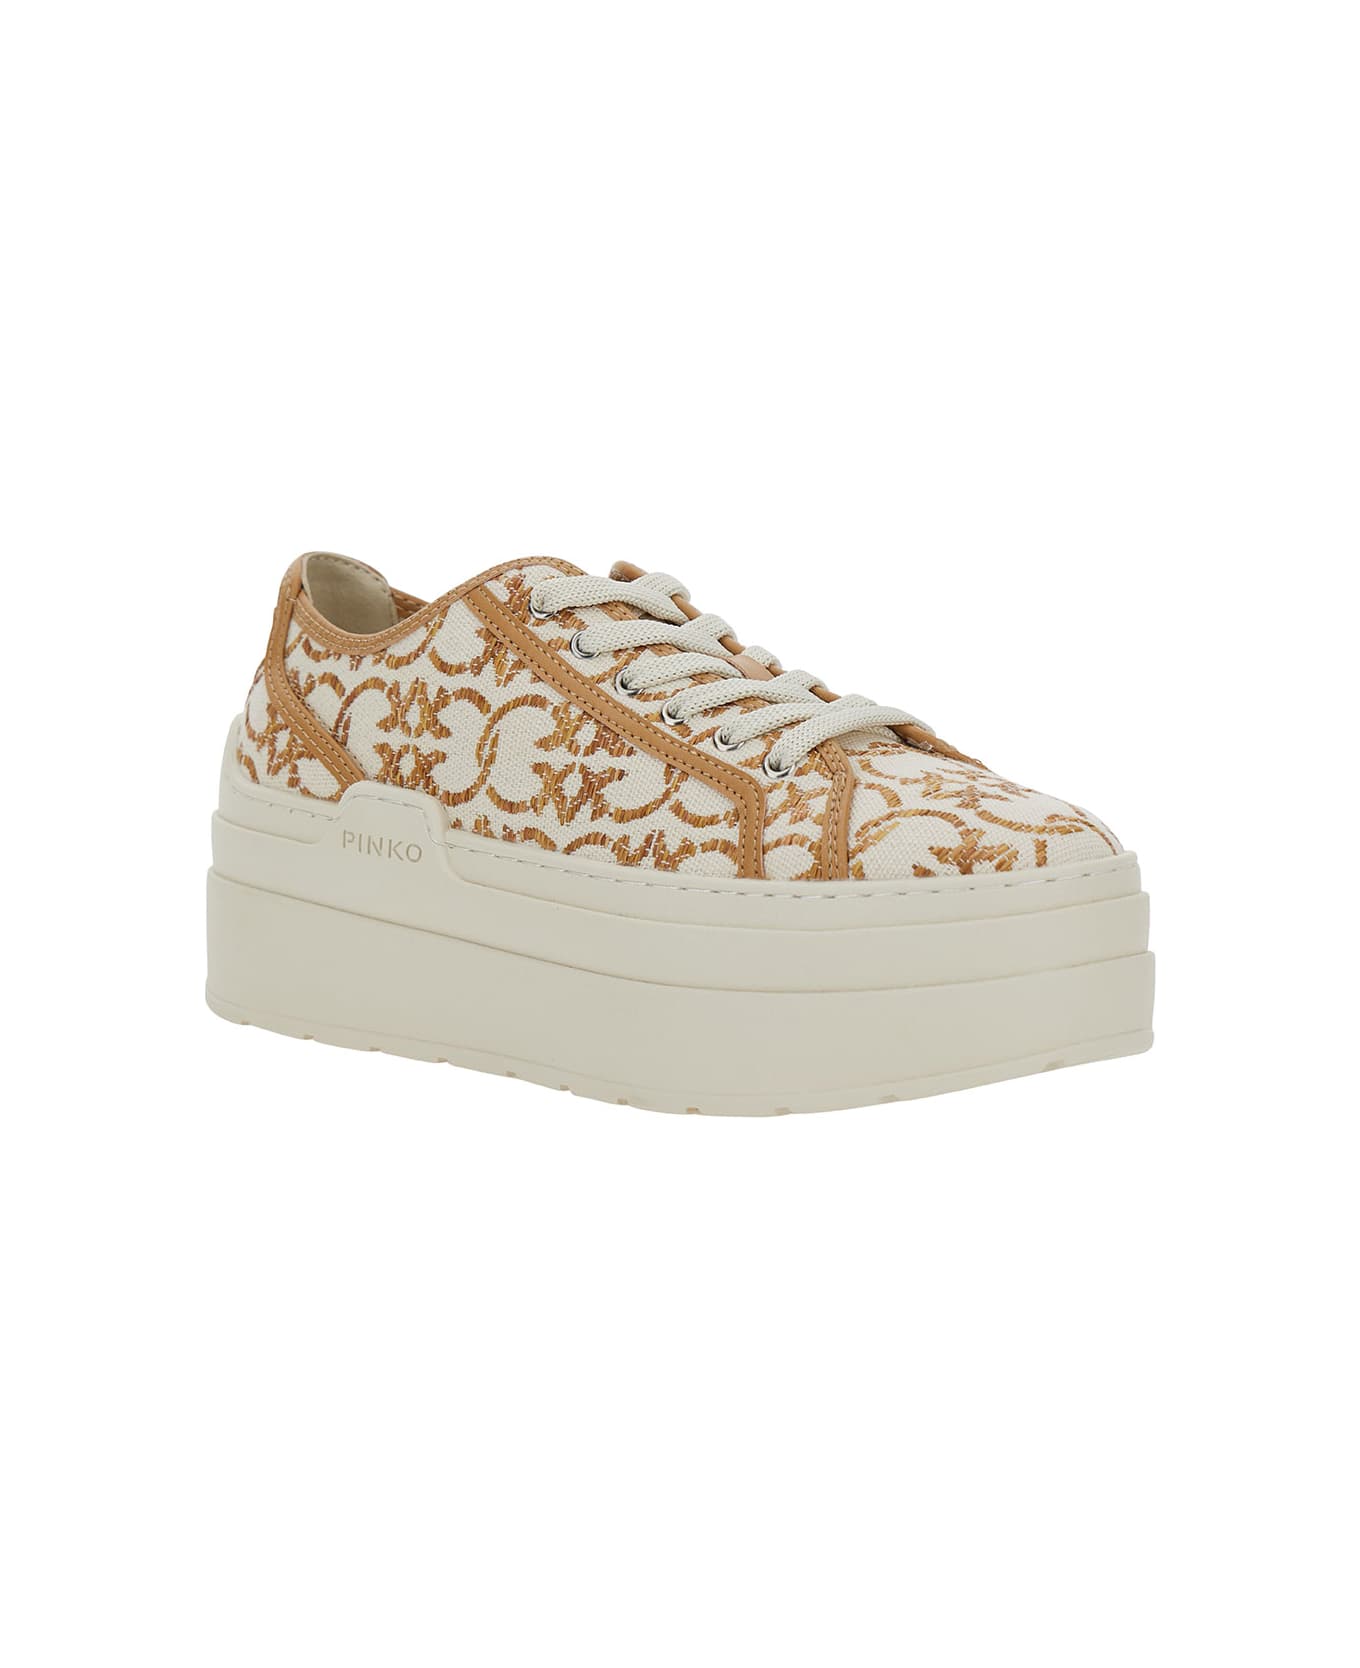 Pinko White And Gold Platform Sneakers With Love Birds Monogram In Canvas Woman - Beige